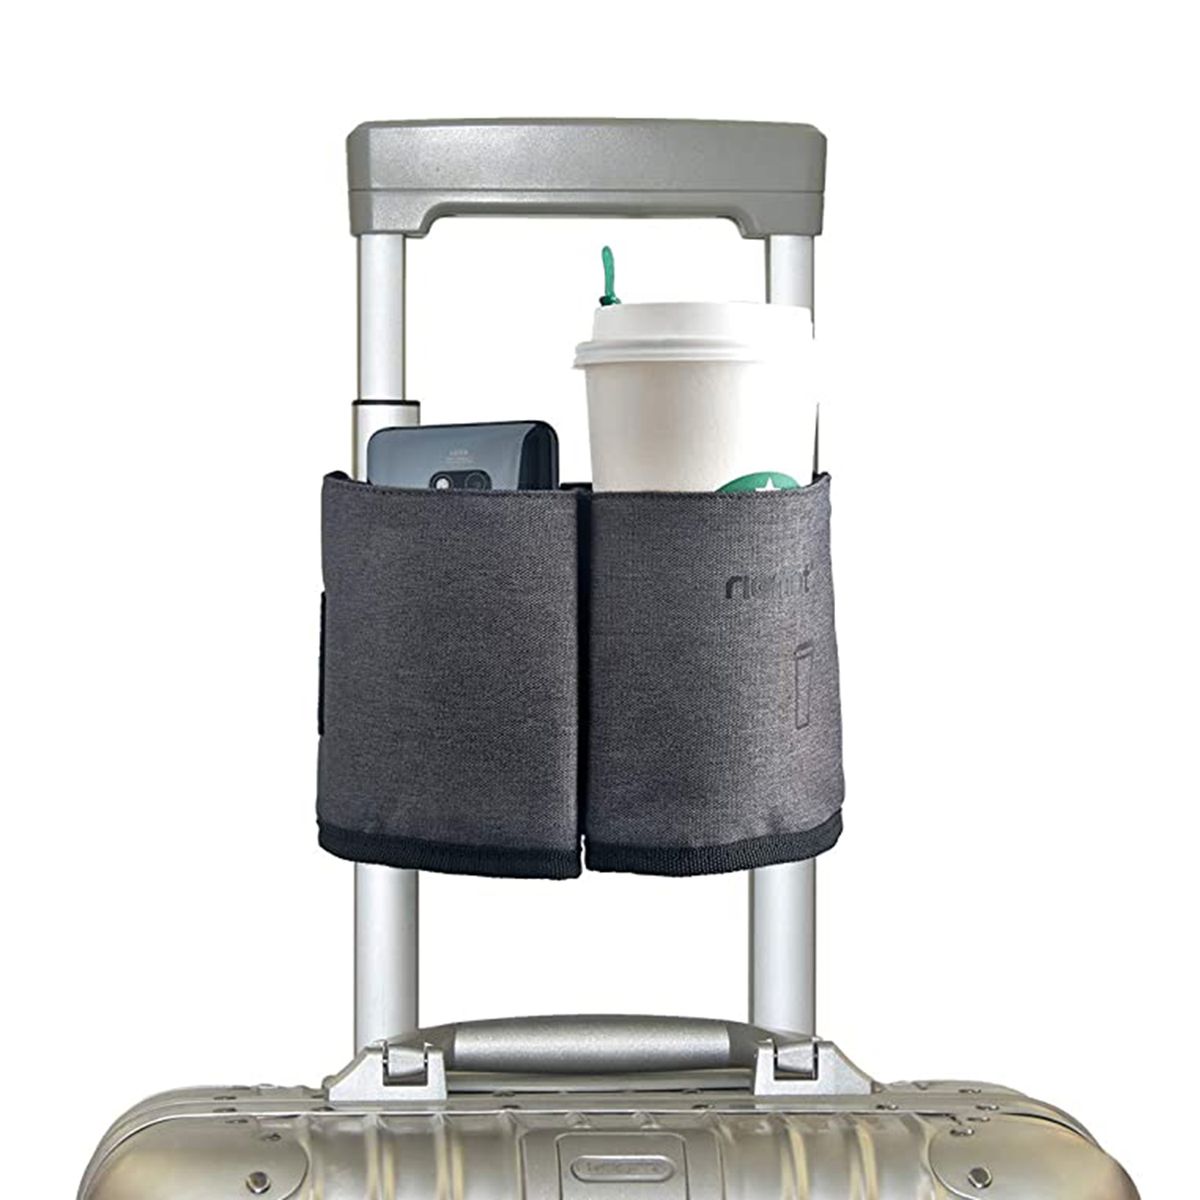 riemot Luggage Travel Cup Holder Free Hand Drink Caddy